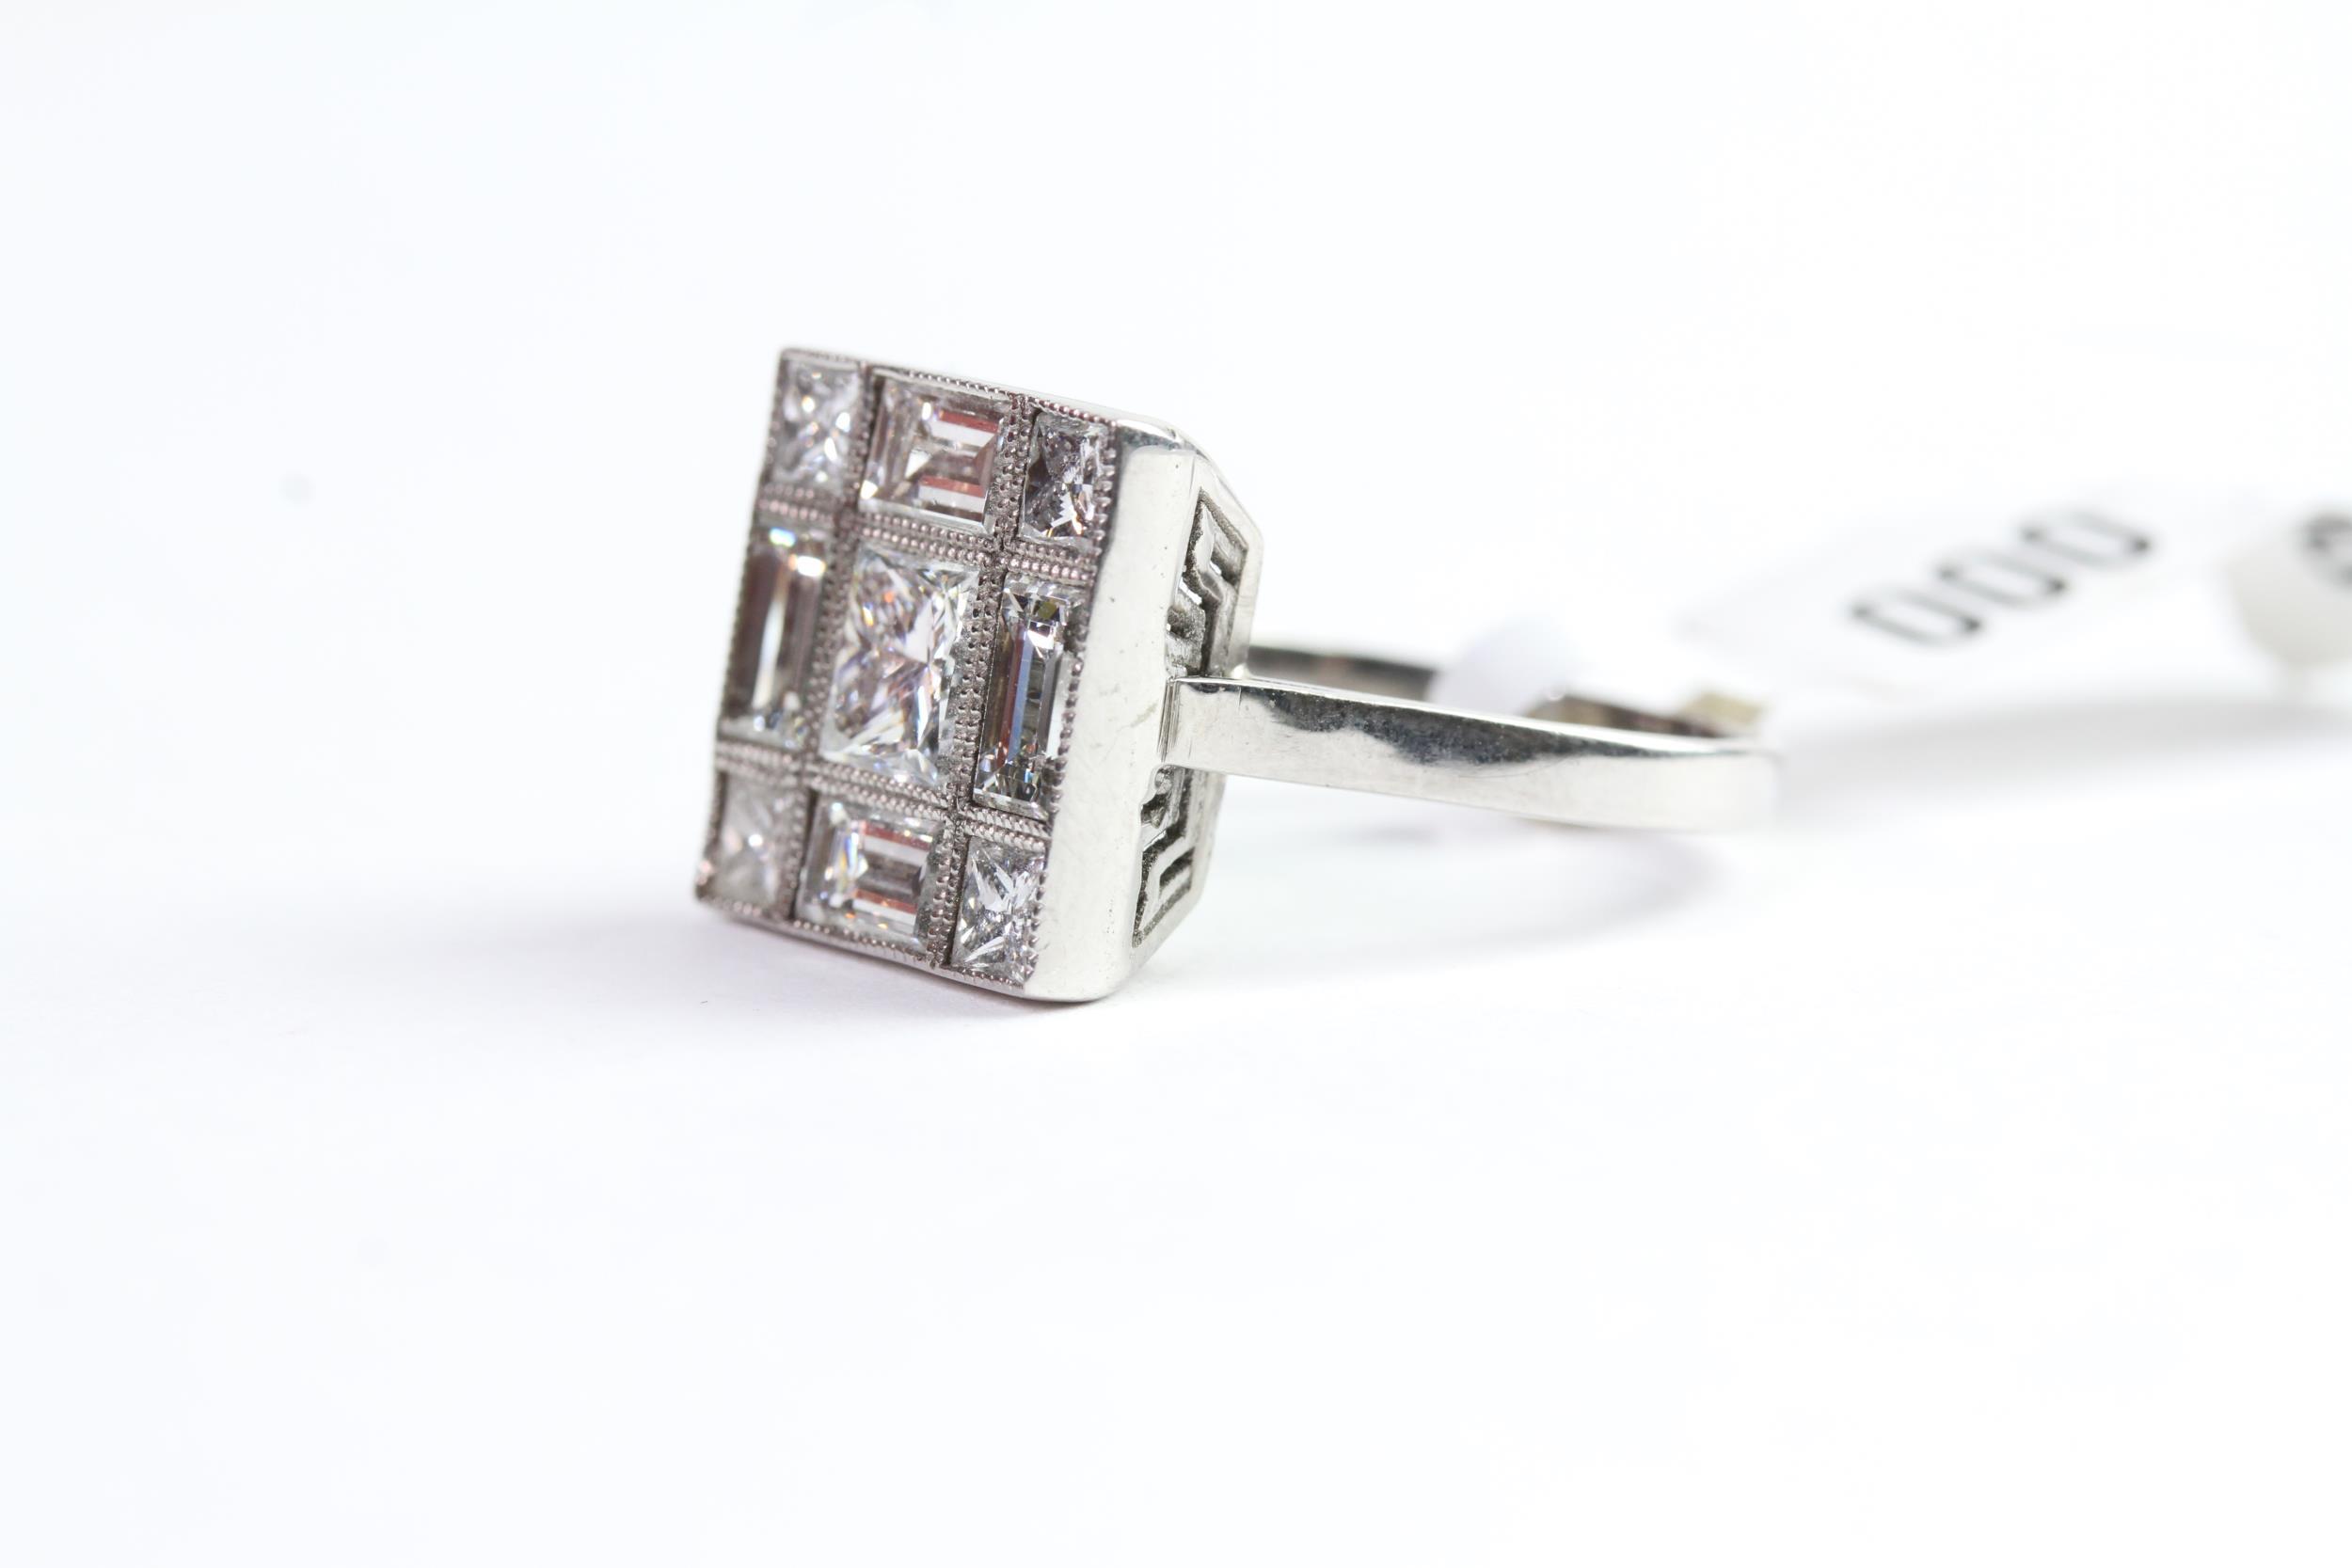 2.40ct Diamond Tablet Ring, Princess cut and Emerald Cut Diamonds, estimated total weight 2.40ct, - Image 3 of 4